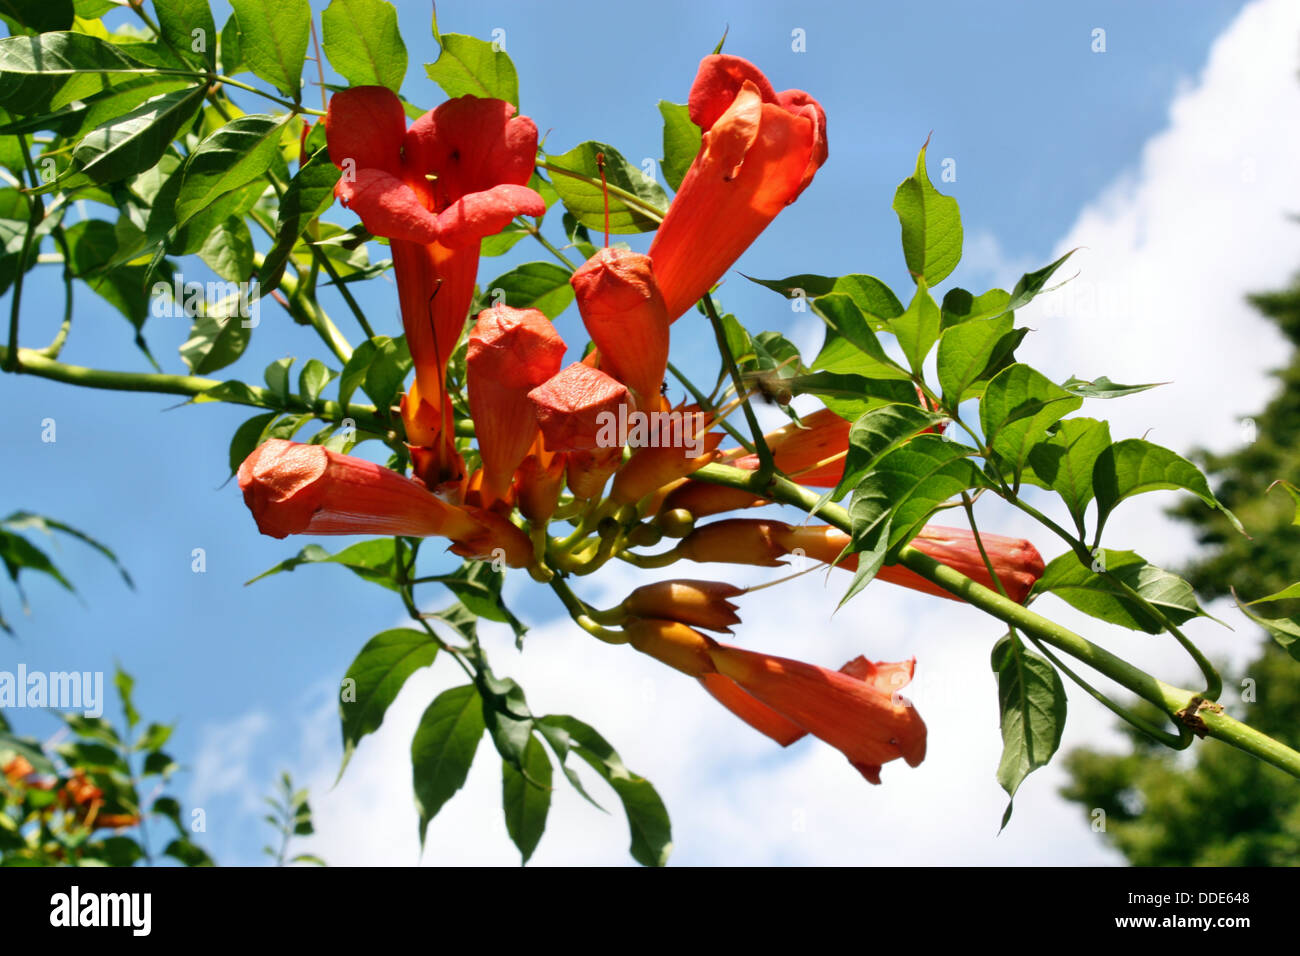 Trumpet flower growing on a blue sky Stock Photo